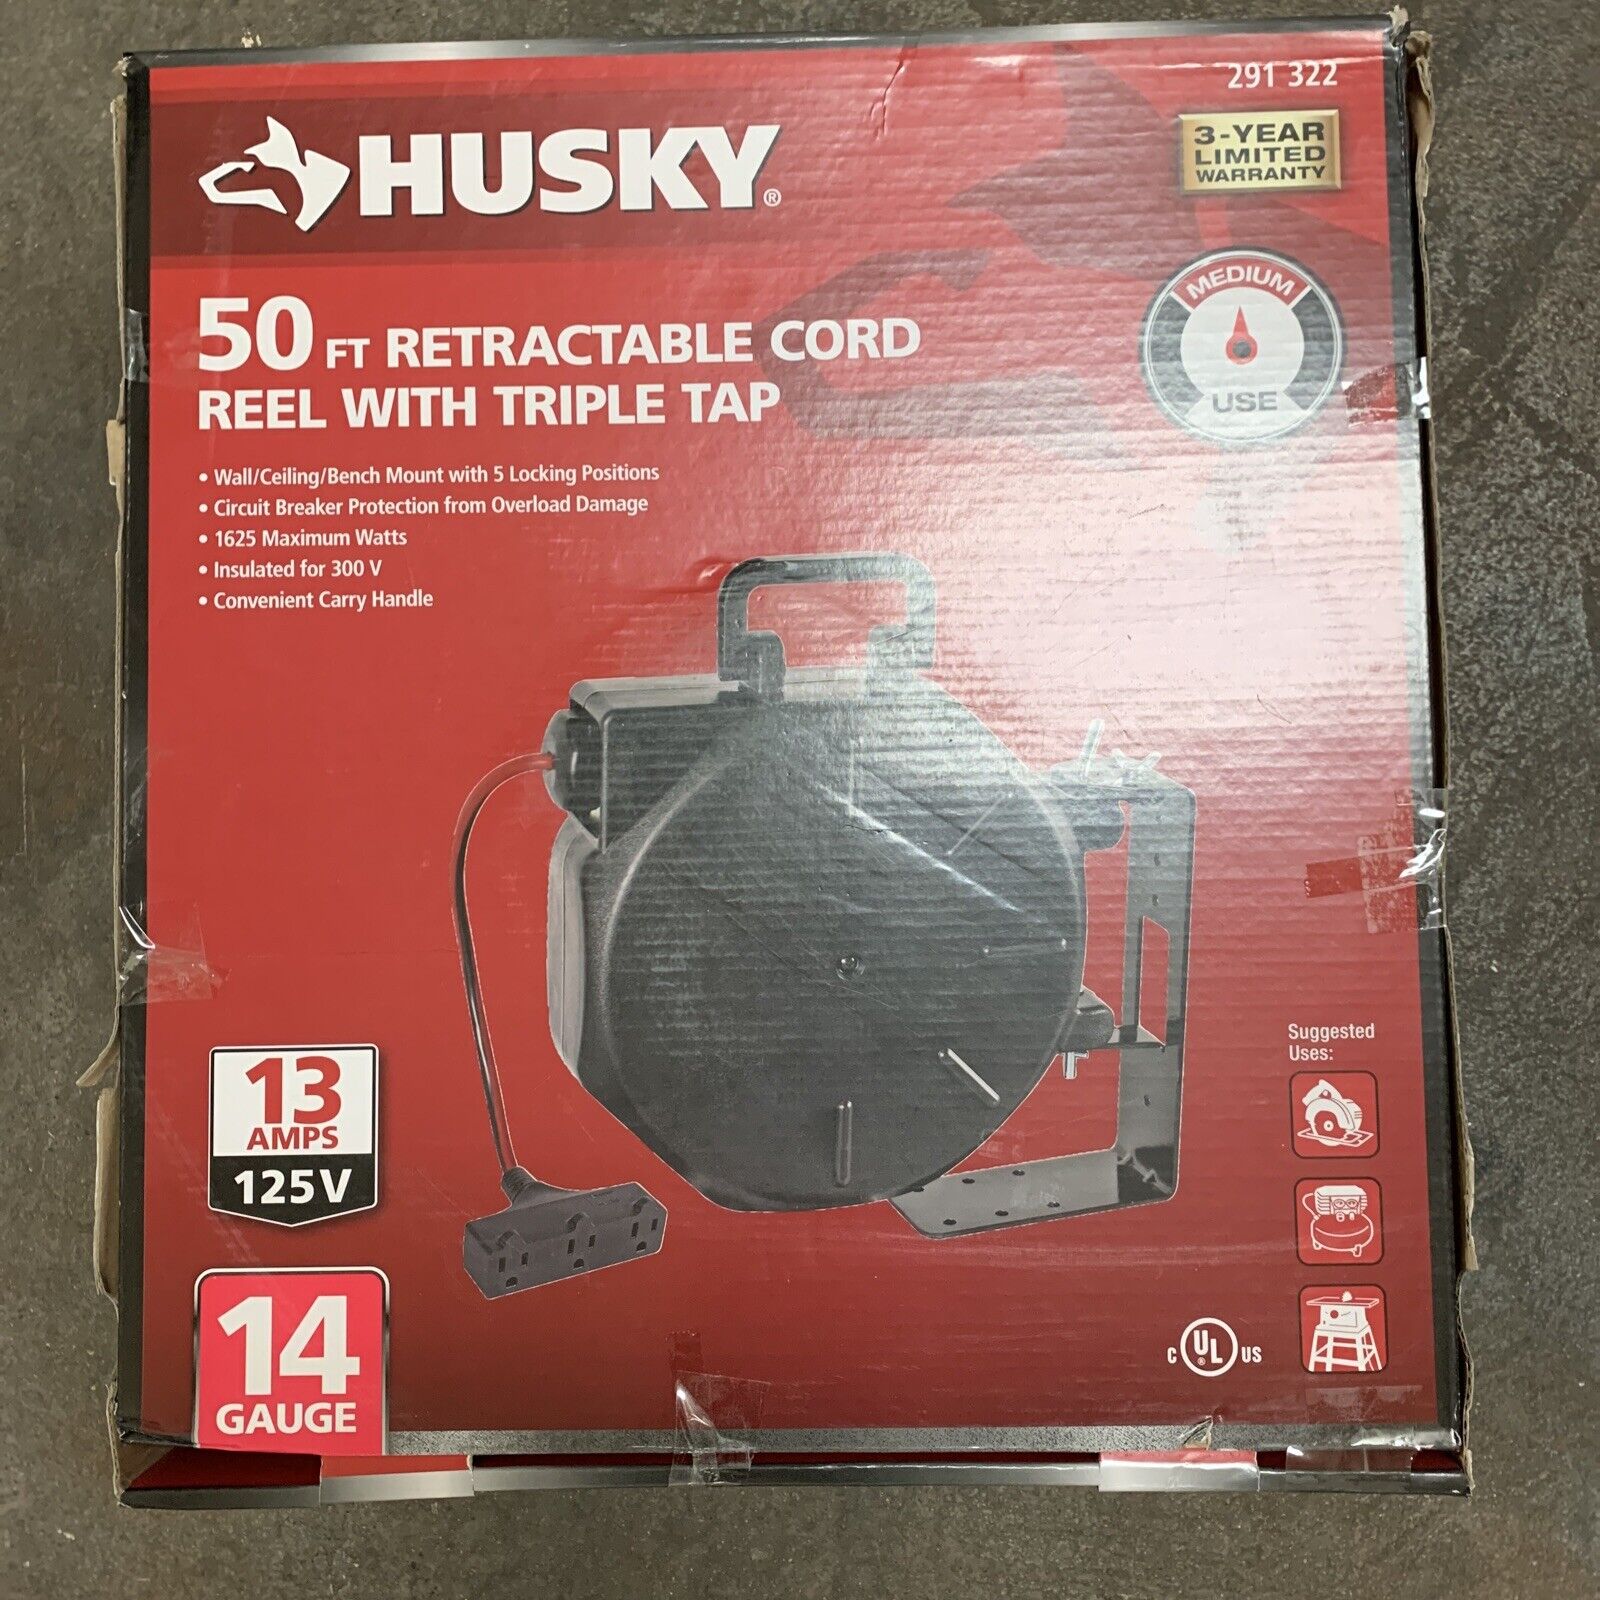 Husky 50ft Retractable cord reel with Triple Tap